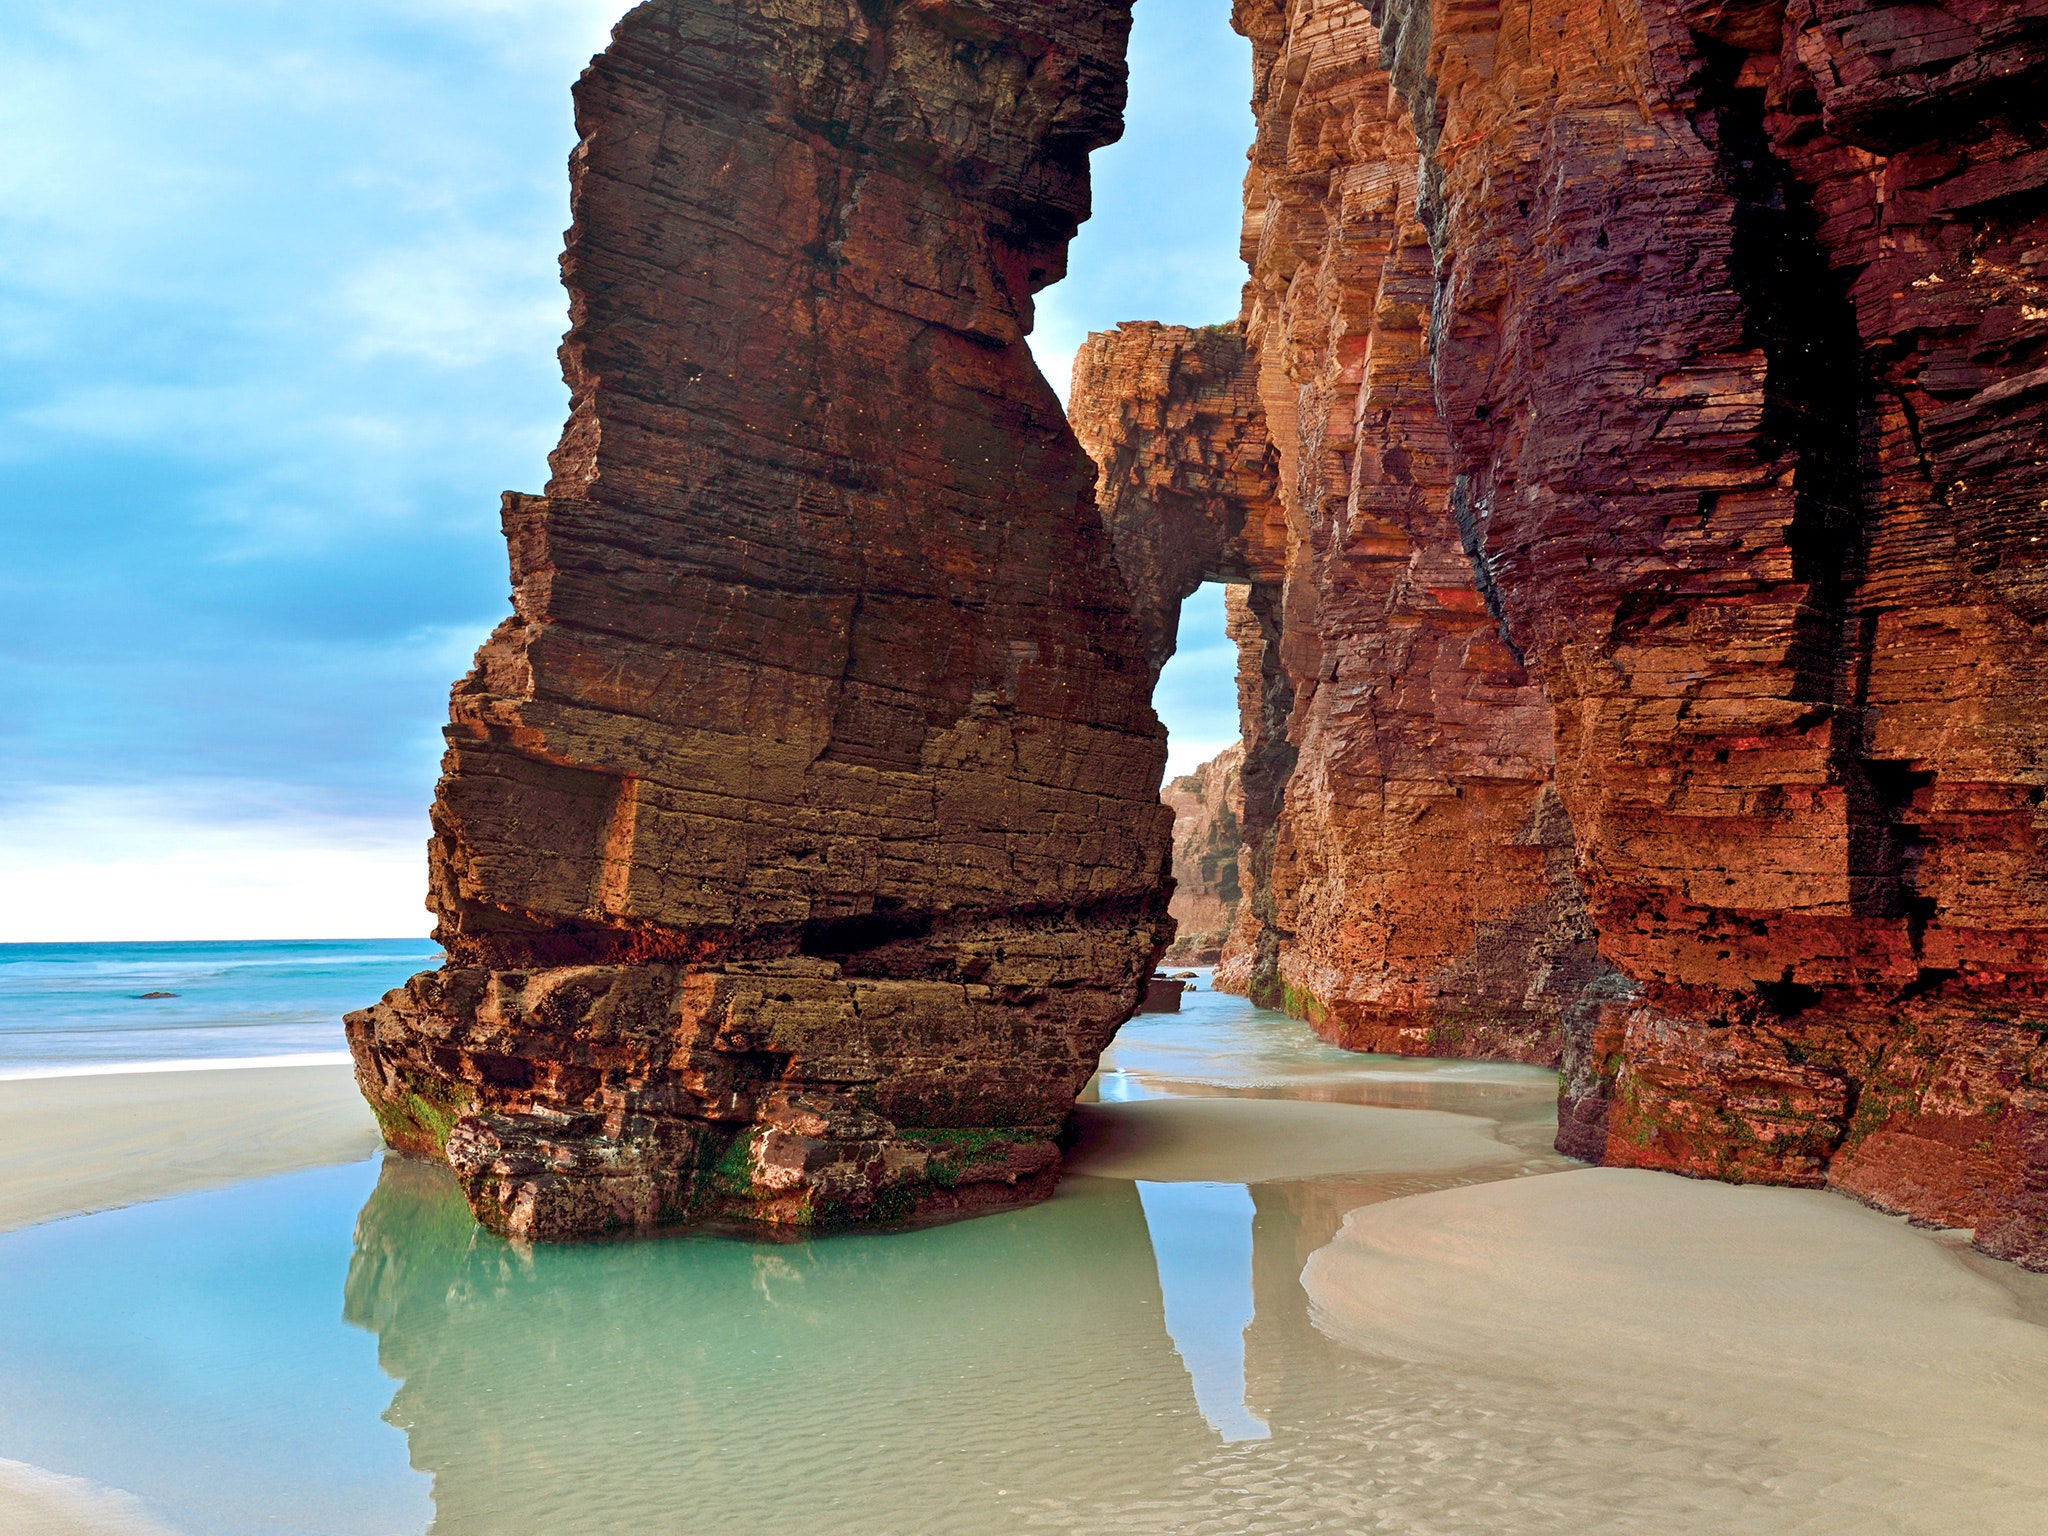 As a destination on Europe's Iberian Peninsula, Spain is renowned for its island paradises and semi-remote sand beaches. We're particularly big fans of Playa de Las Catedrales, a small stretch of sand on the Galician coast where natural stone arches form a walkable "cathedral" at low tide.<p>Sign up to receive the latest news, expert tips, and inspiration on all things travel</p><a href="https://www.cntraveler.com/newsletter/the-daily?sourceCode=msnsend">Inspire Me</a>